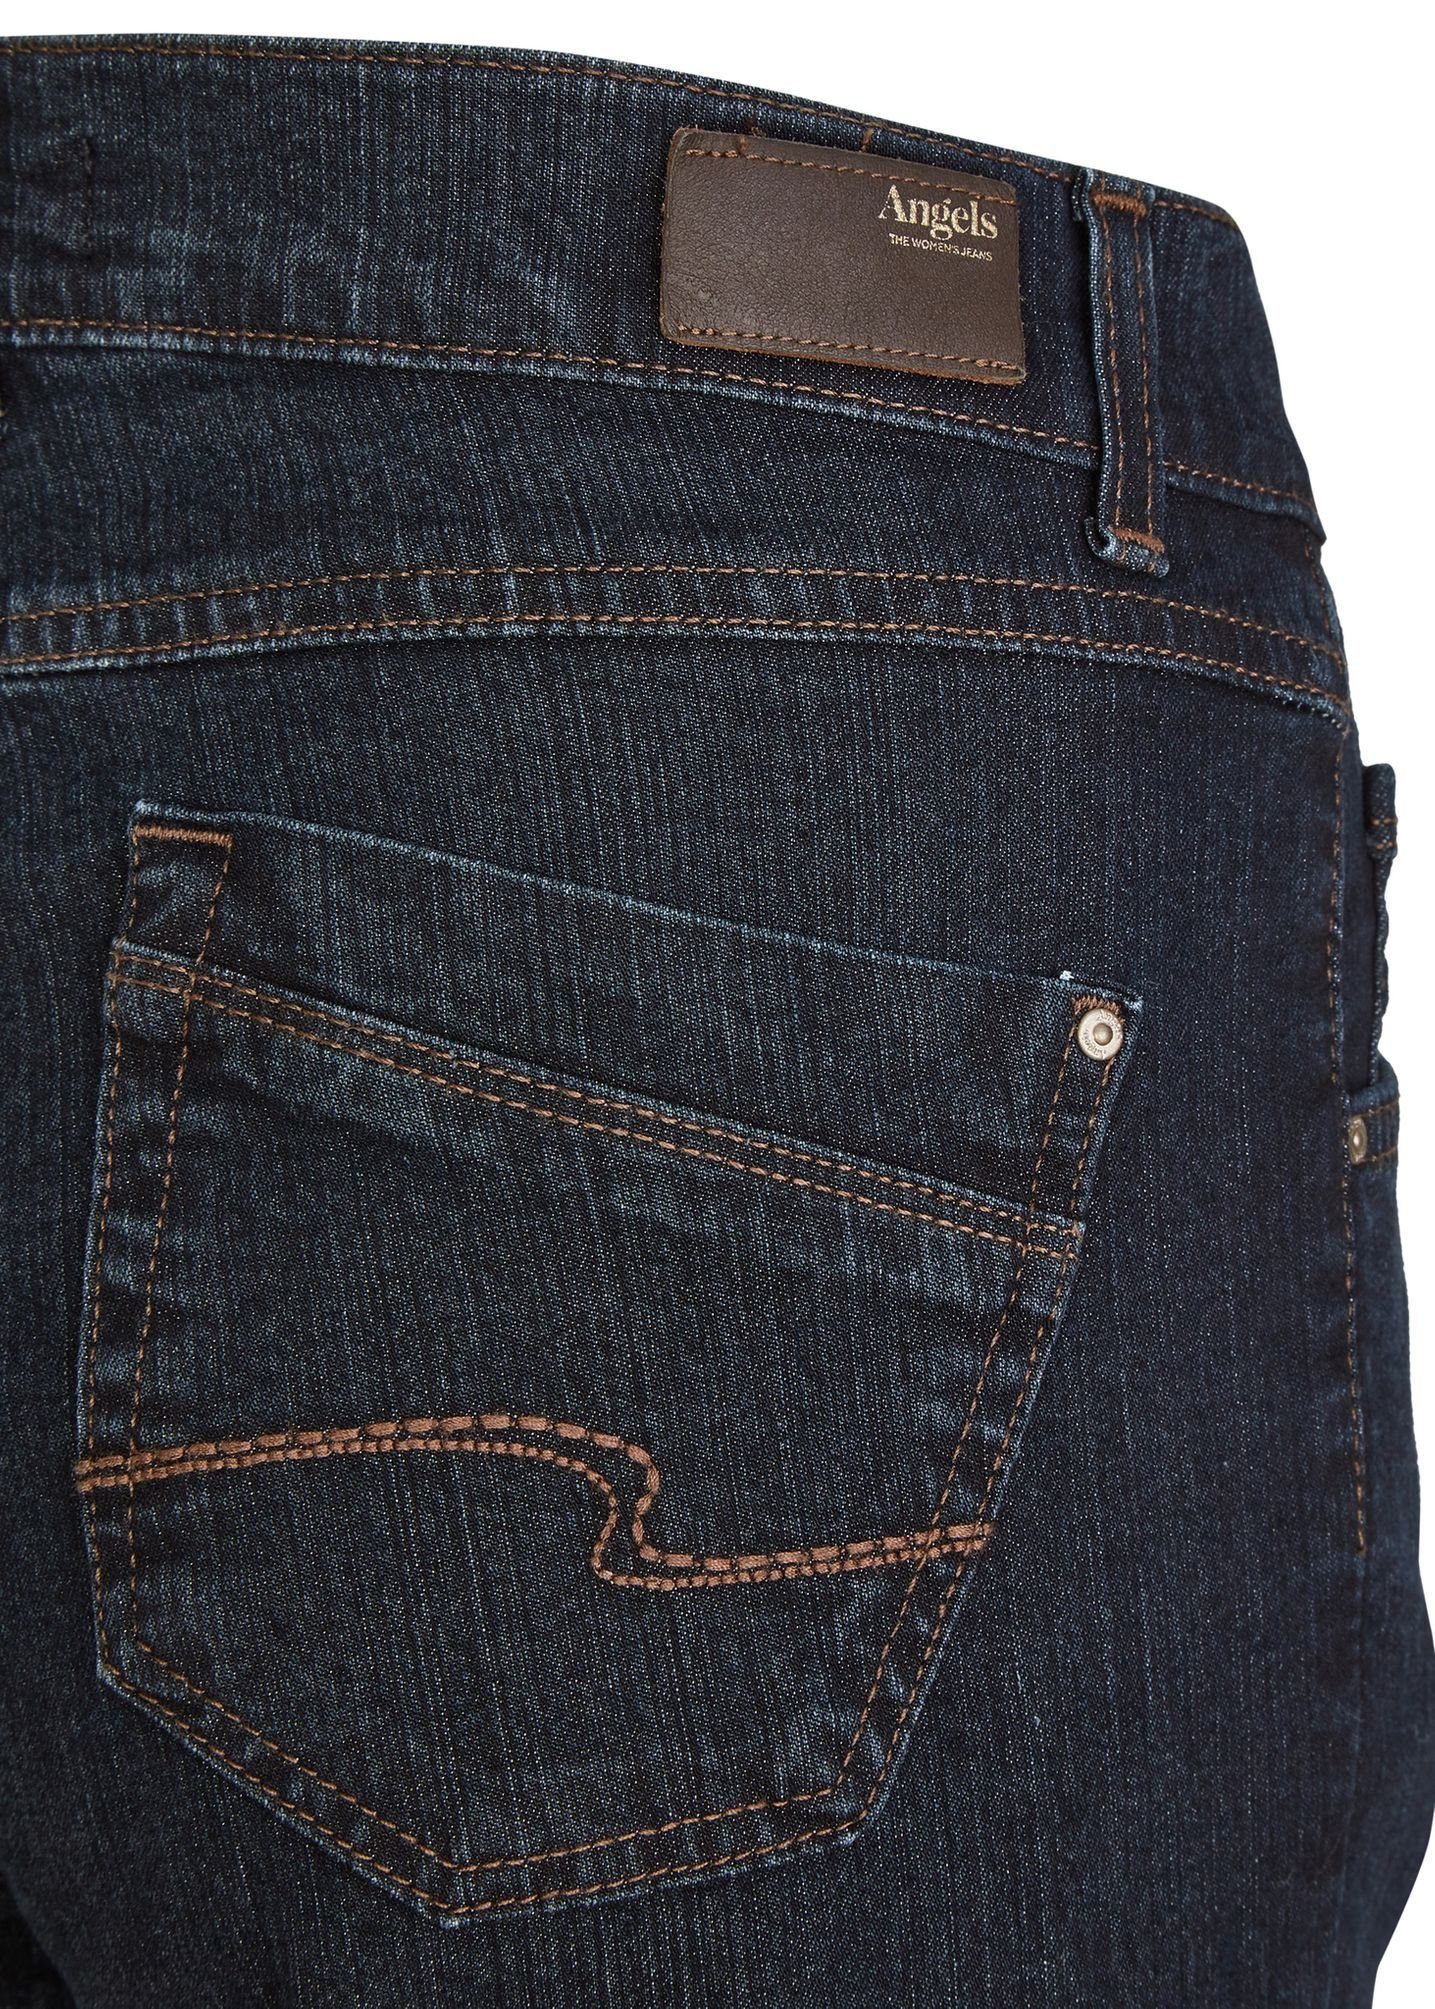 Dolly Blue 5380 ANGELS (30) 5-Pocket-Jeans Night